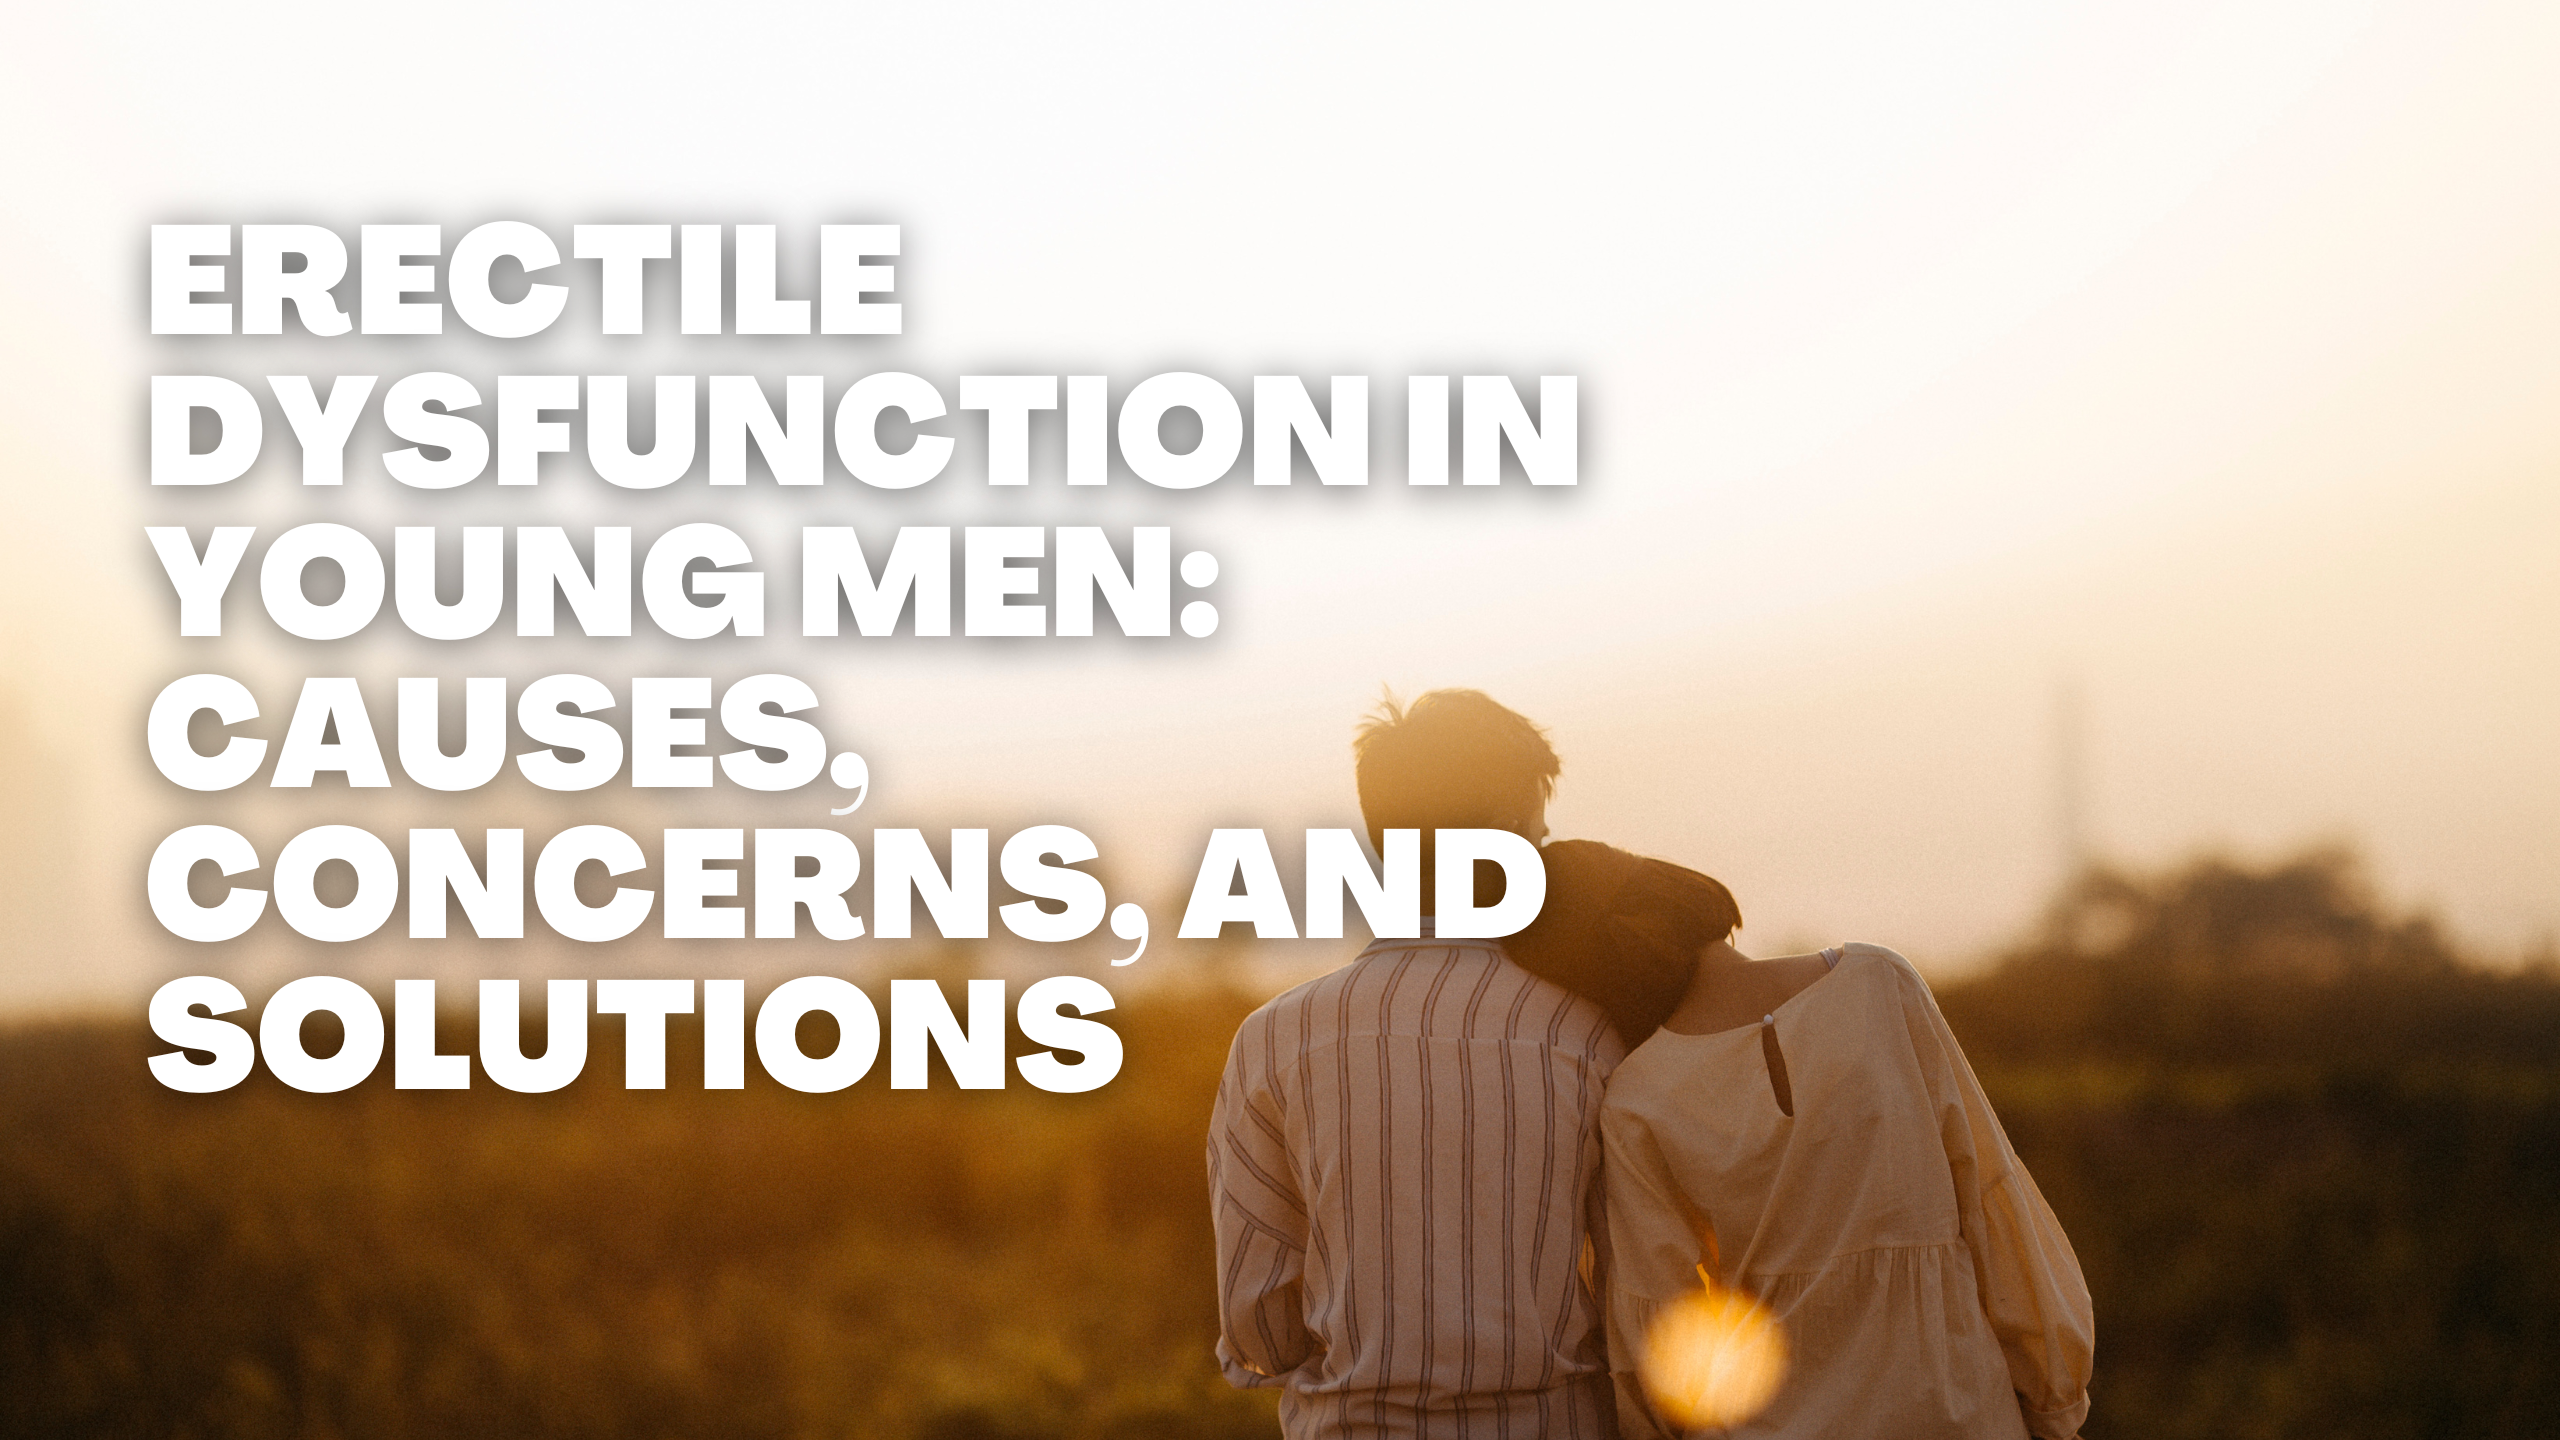 Erectile Dysfunction in Young Men: Causes, Concerns, and Solutions